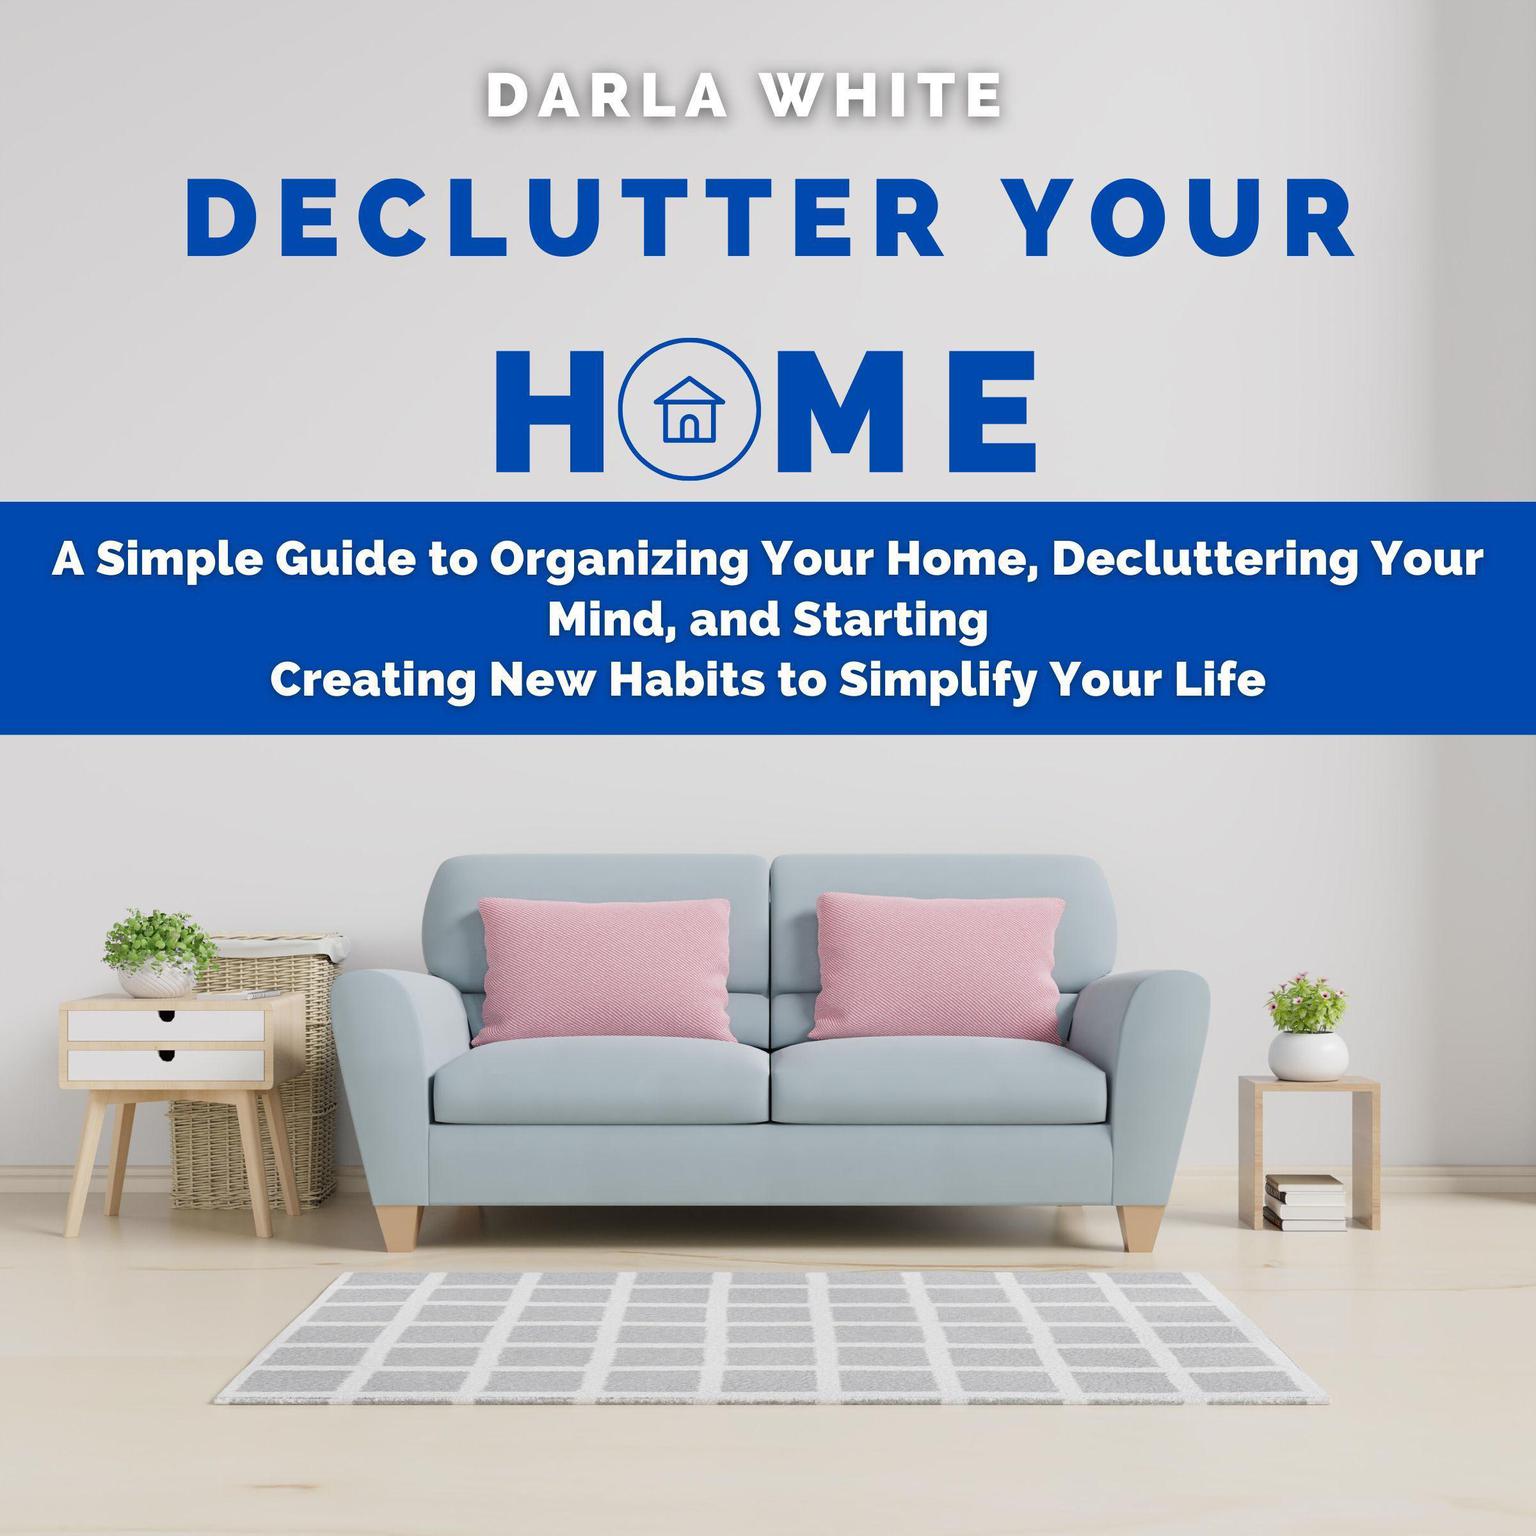 Declutter Your Home: A Simple Guide to Organizing Your Home, Decluttering Your Mind, and Starting Creating New Habits to Simplify Your Life Audiobook, by Darla White